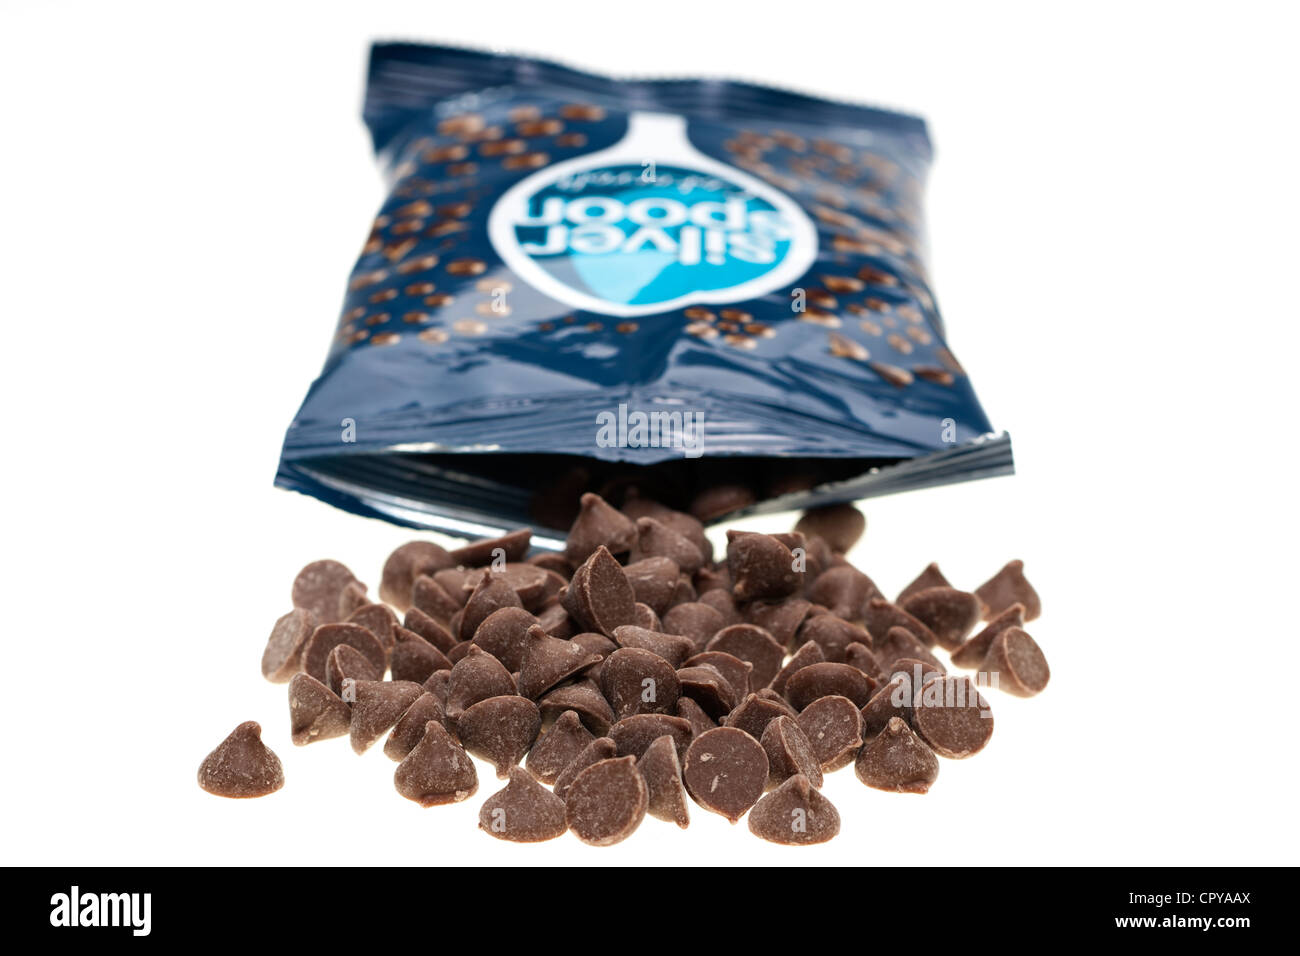 Packet of Silver Spoon milk chocolate chips Stock Photo